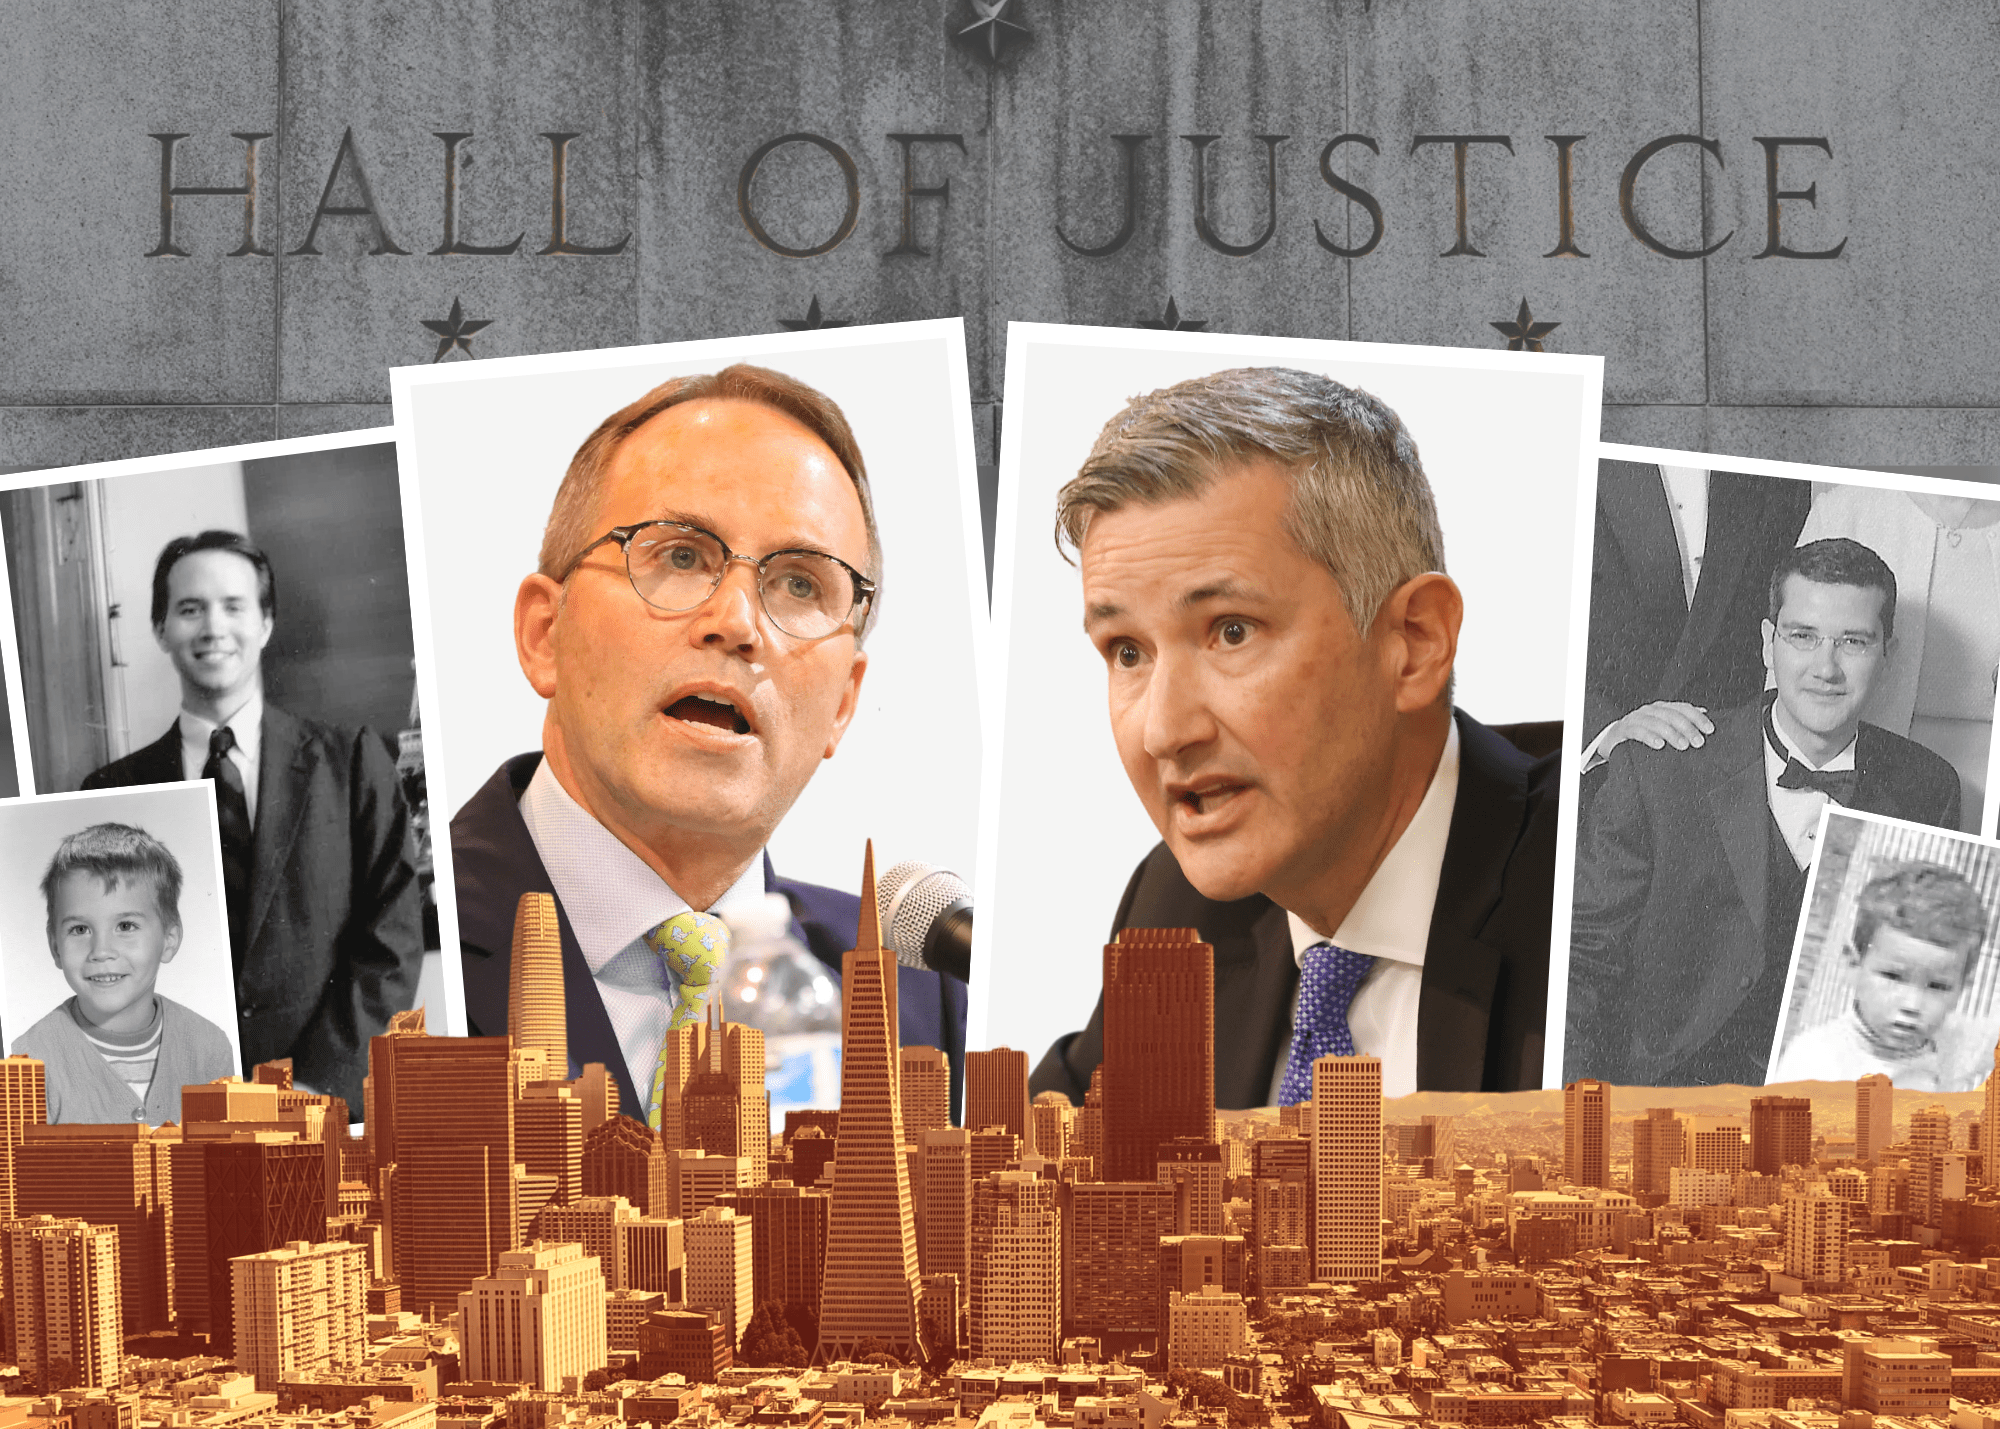 Illustration of two judge candidates in front of city skyline.